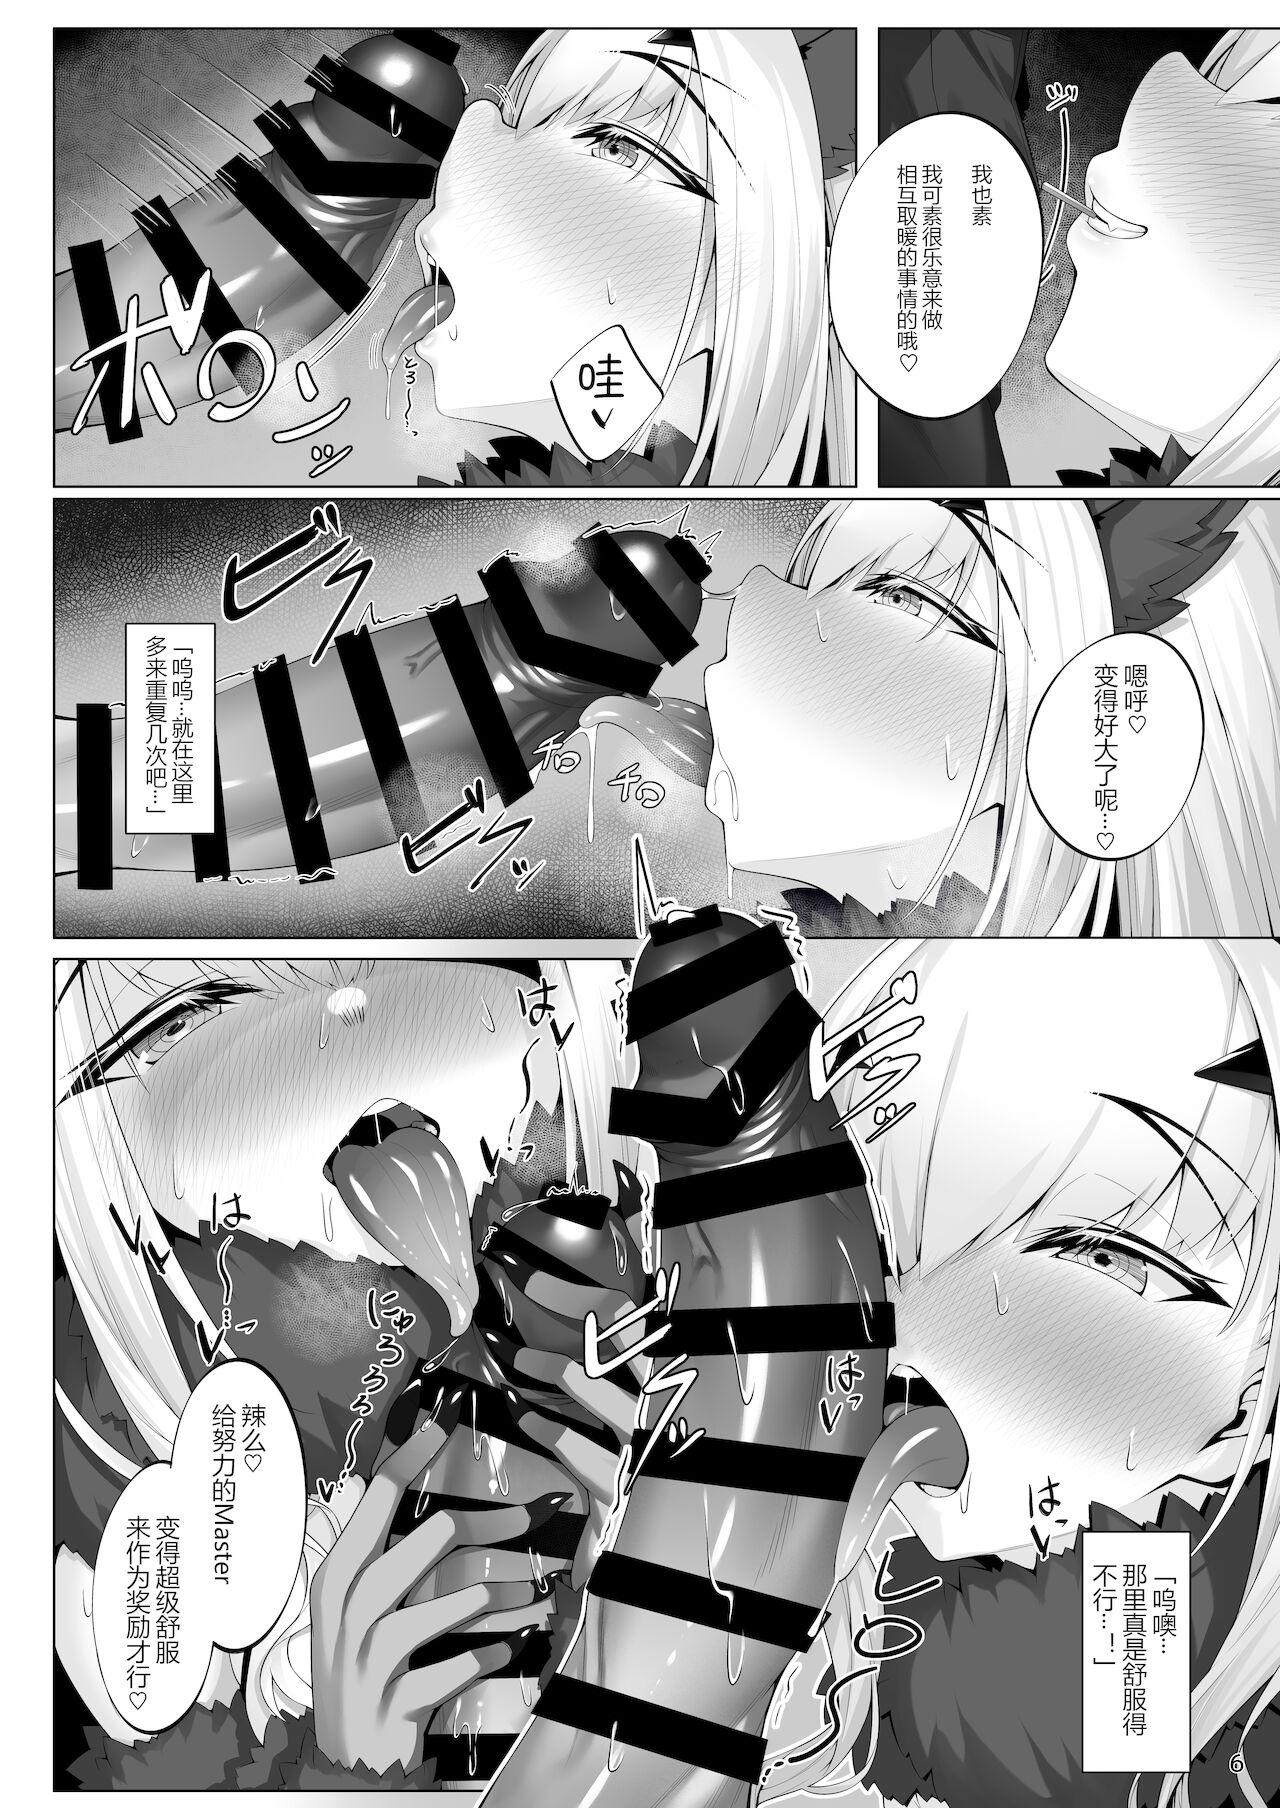 Bisex Melusine to Iroiro Etchi Hon - Fate grand order Wives - Page 6